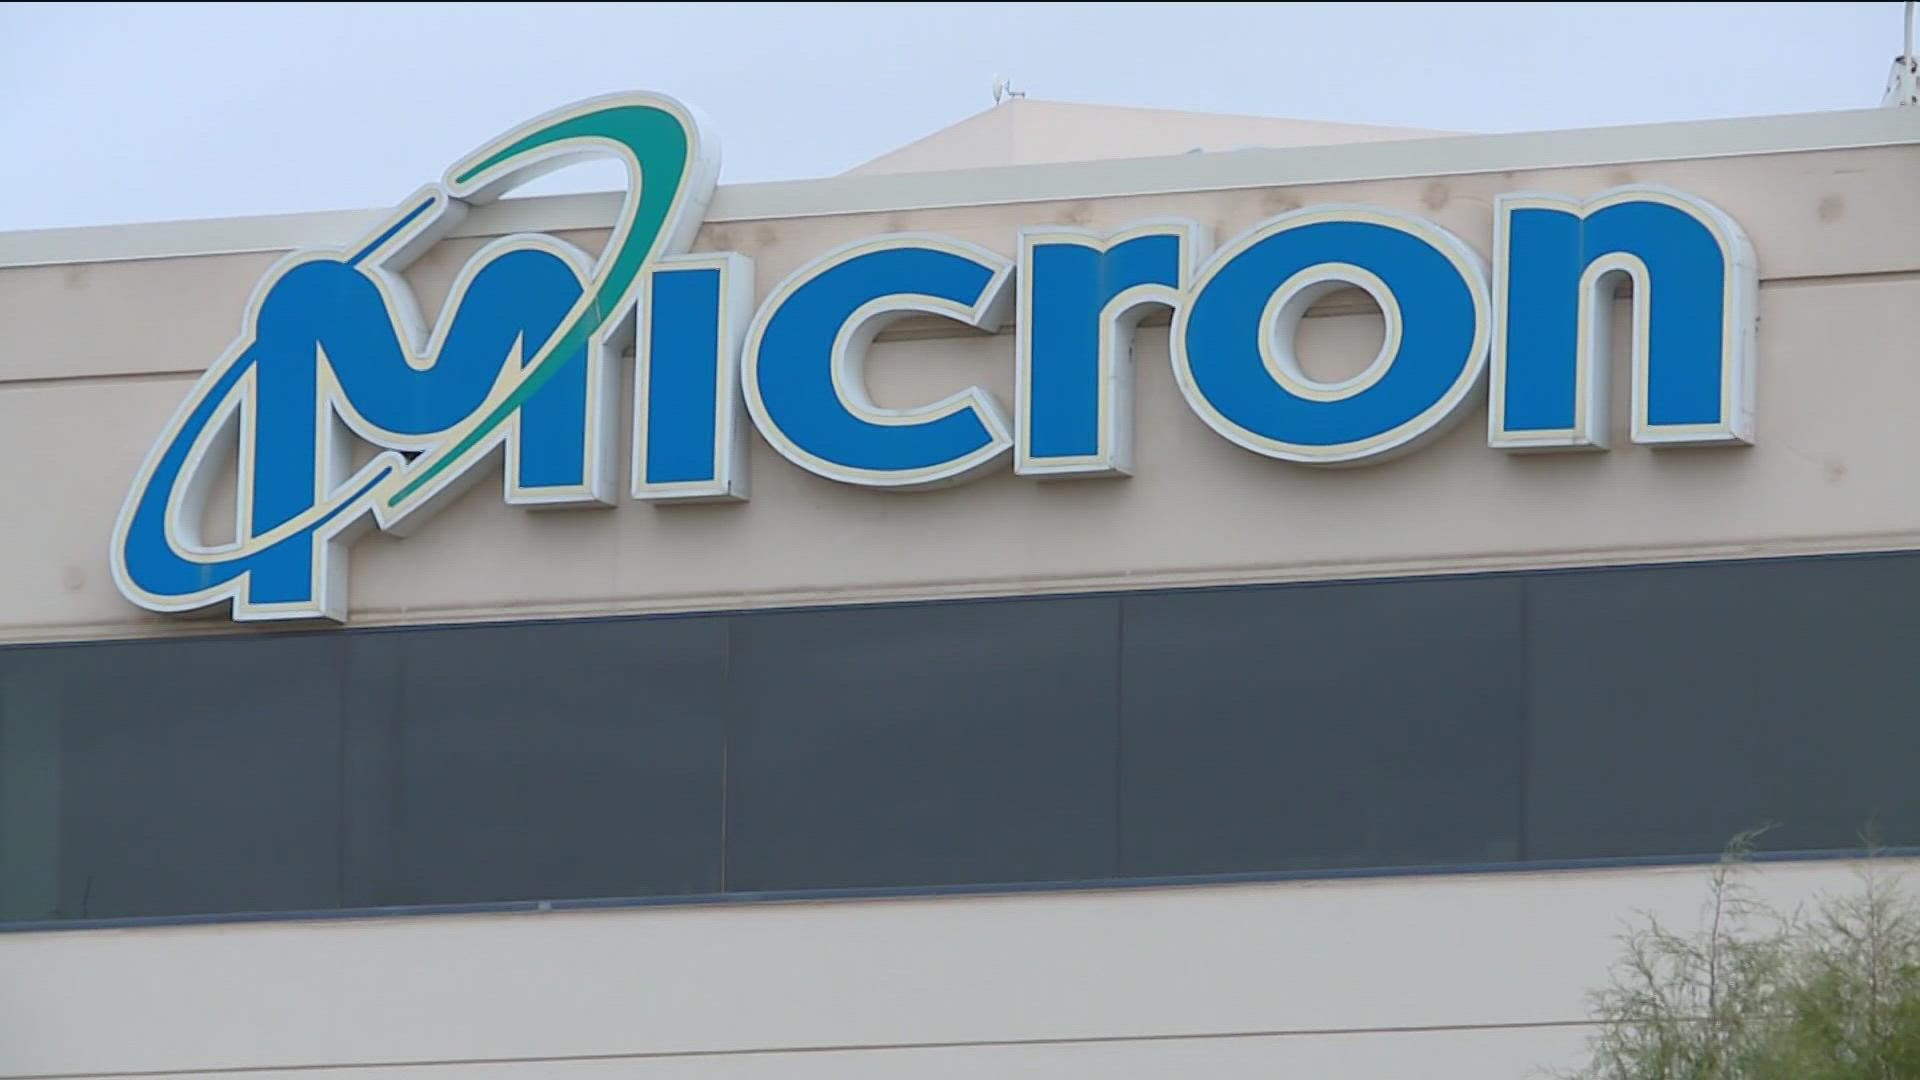 Micron Technology announced Thursday morning that it plans to invest $15 billion through the end of the decade to build the new plant for "leading-edge memory."